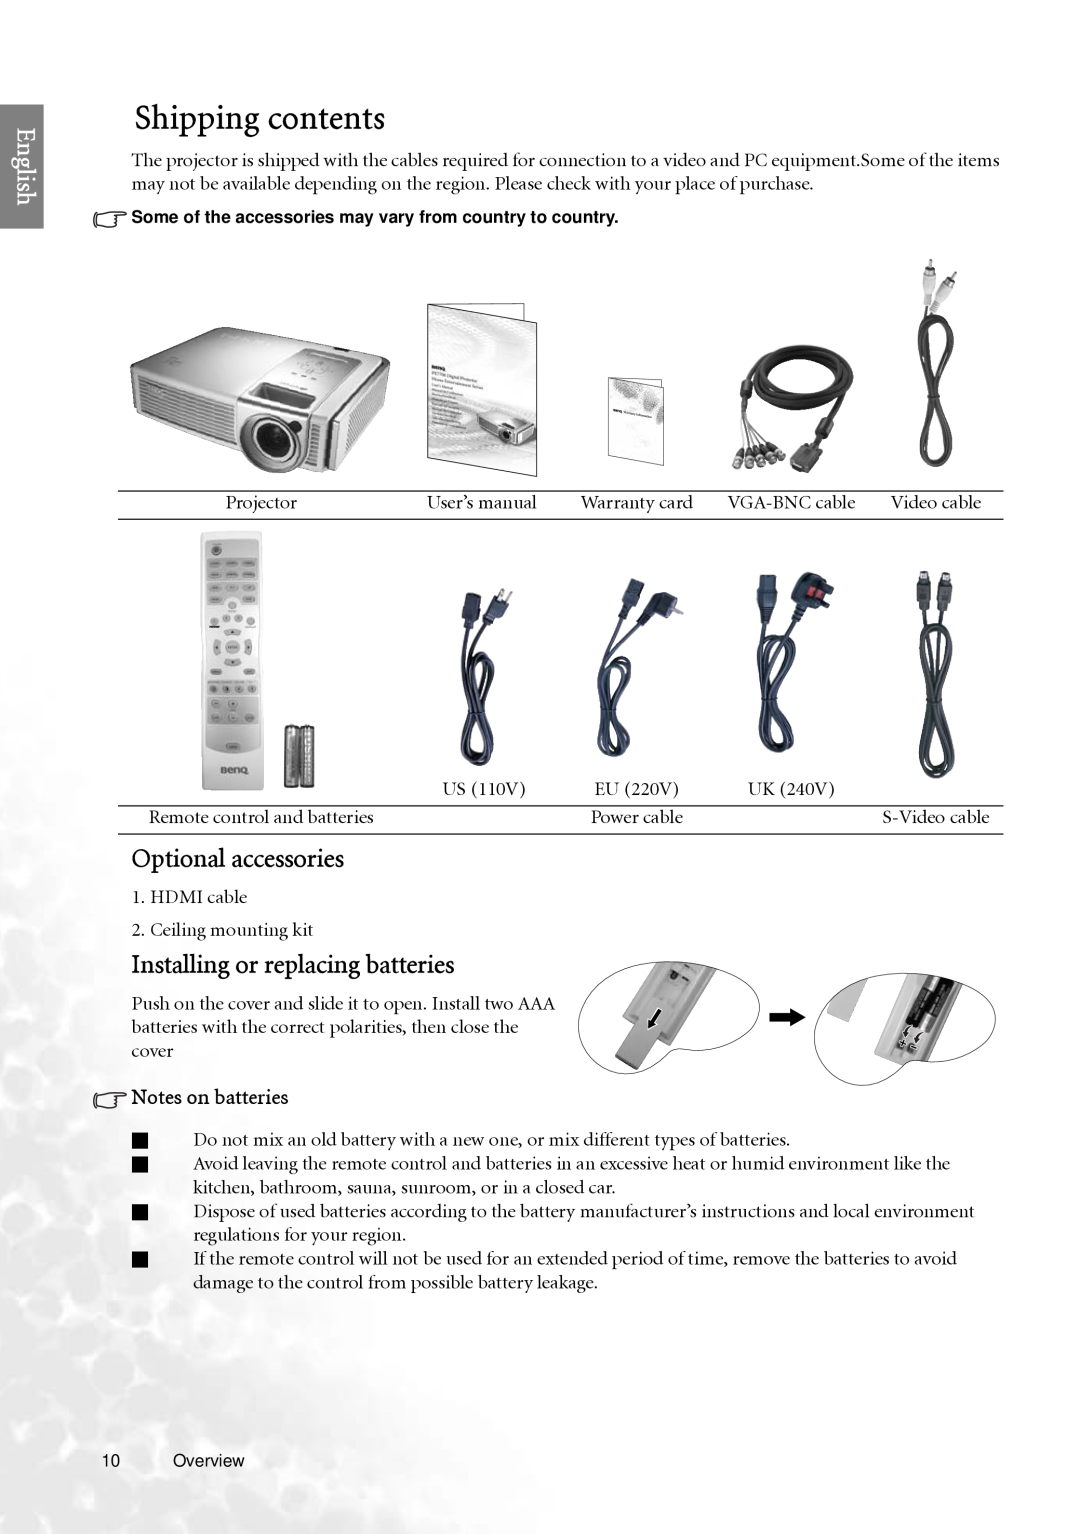 BenQ PE7700 user manual Shipping contents, Optional accessories, Installing or replacing batteries, English 